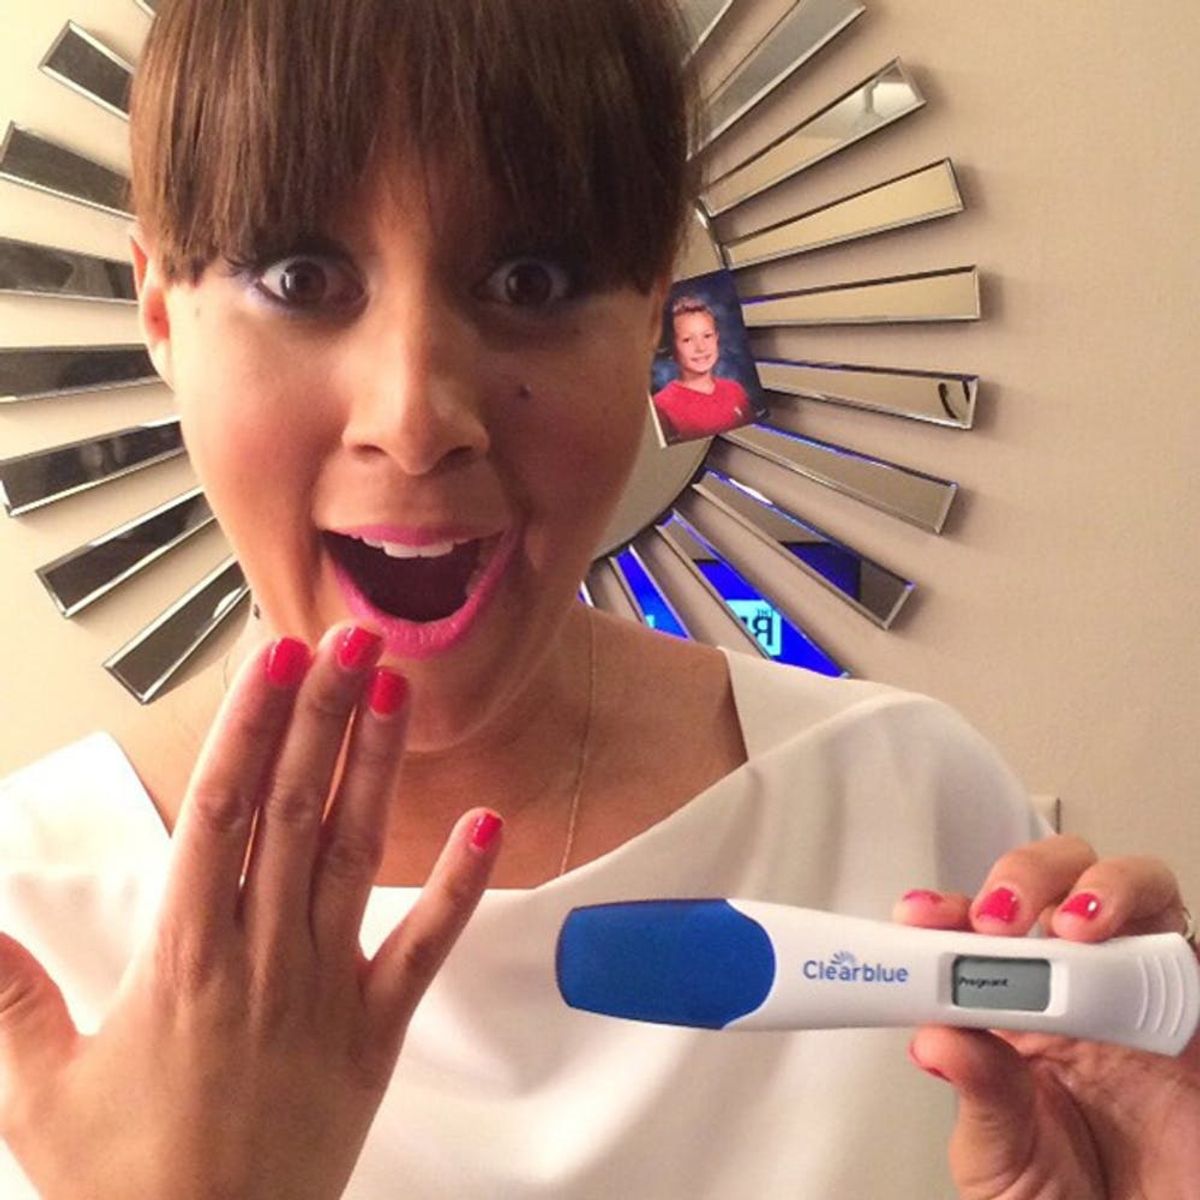 13 Awesomely Epic Celeb Pregnancy Announcements to Recreate